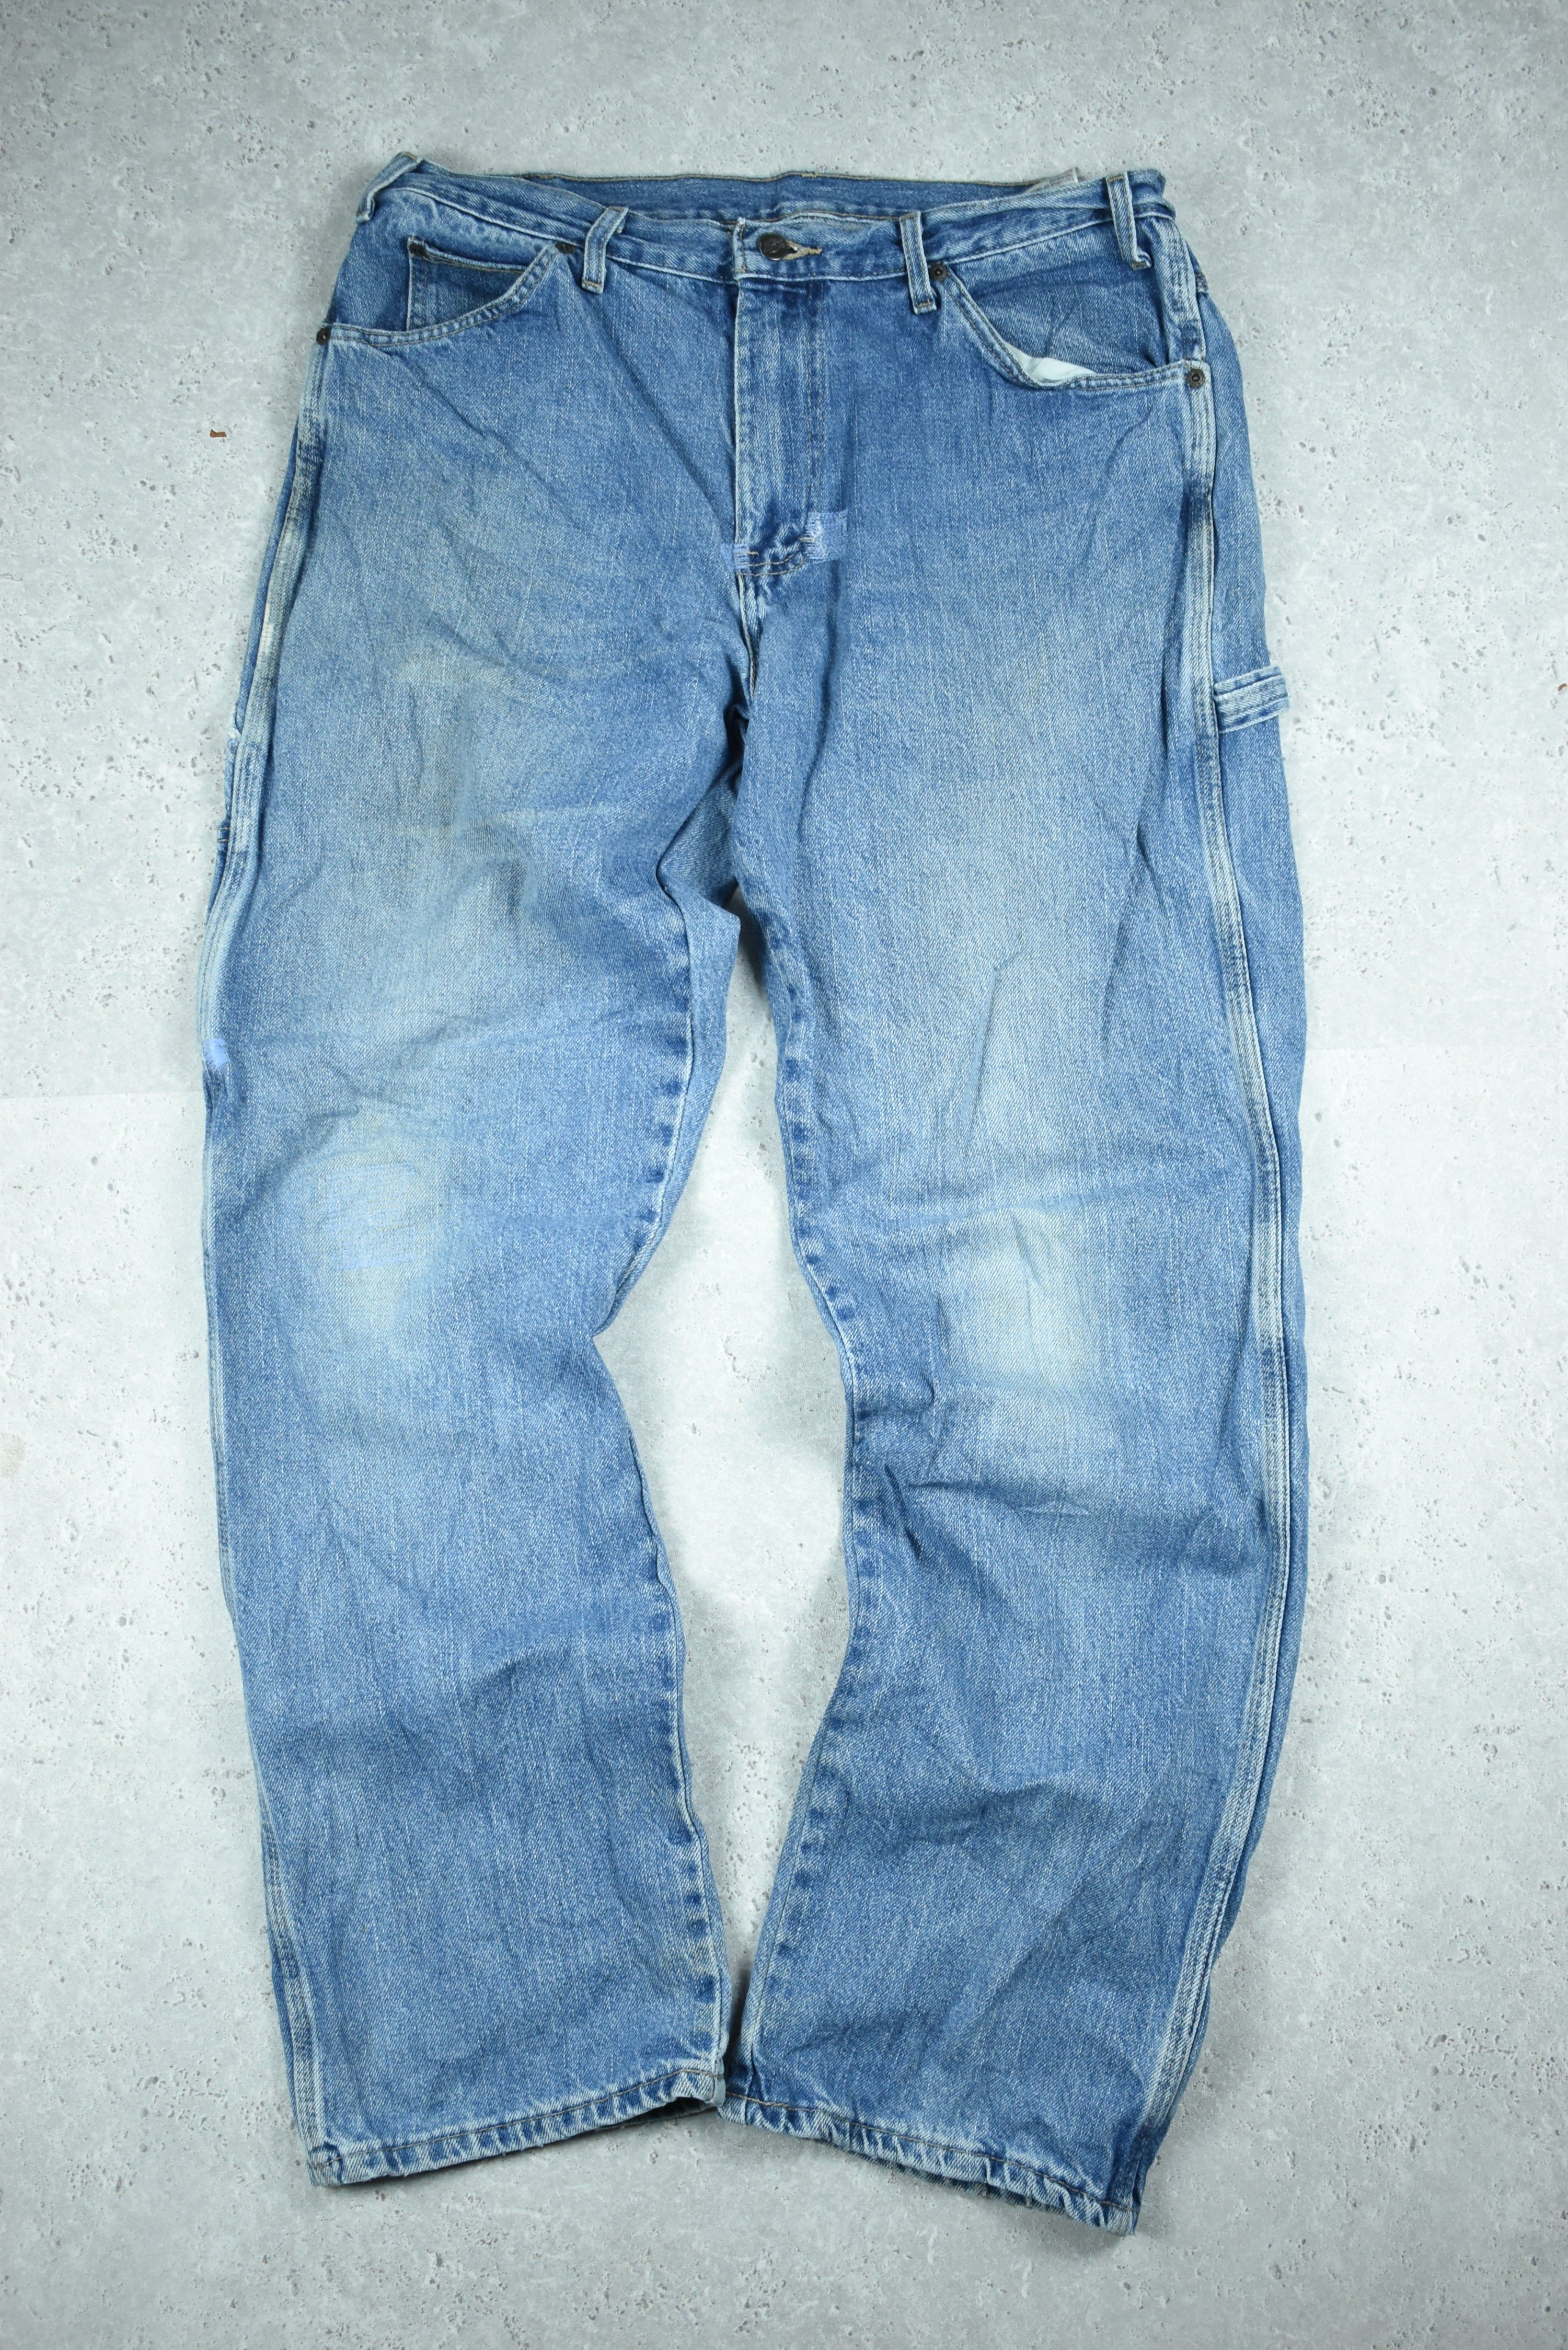 Vintage Dickies Relaxed Fit Denim Jeans 34x32